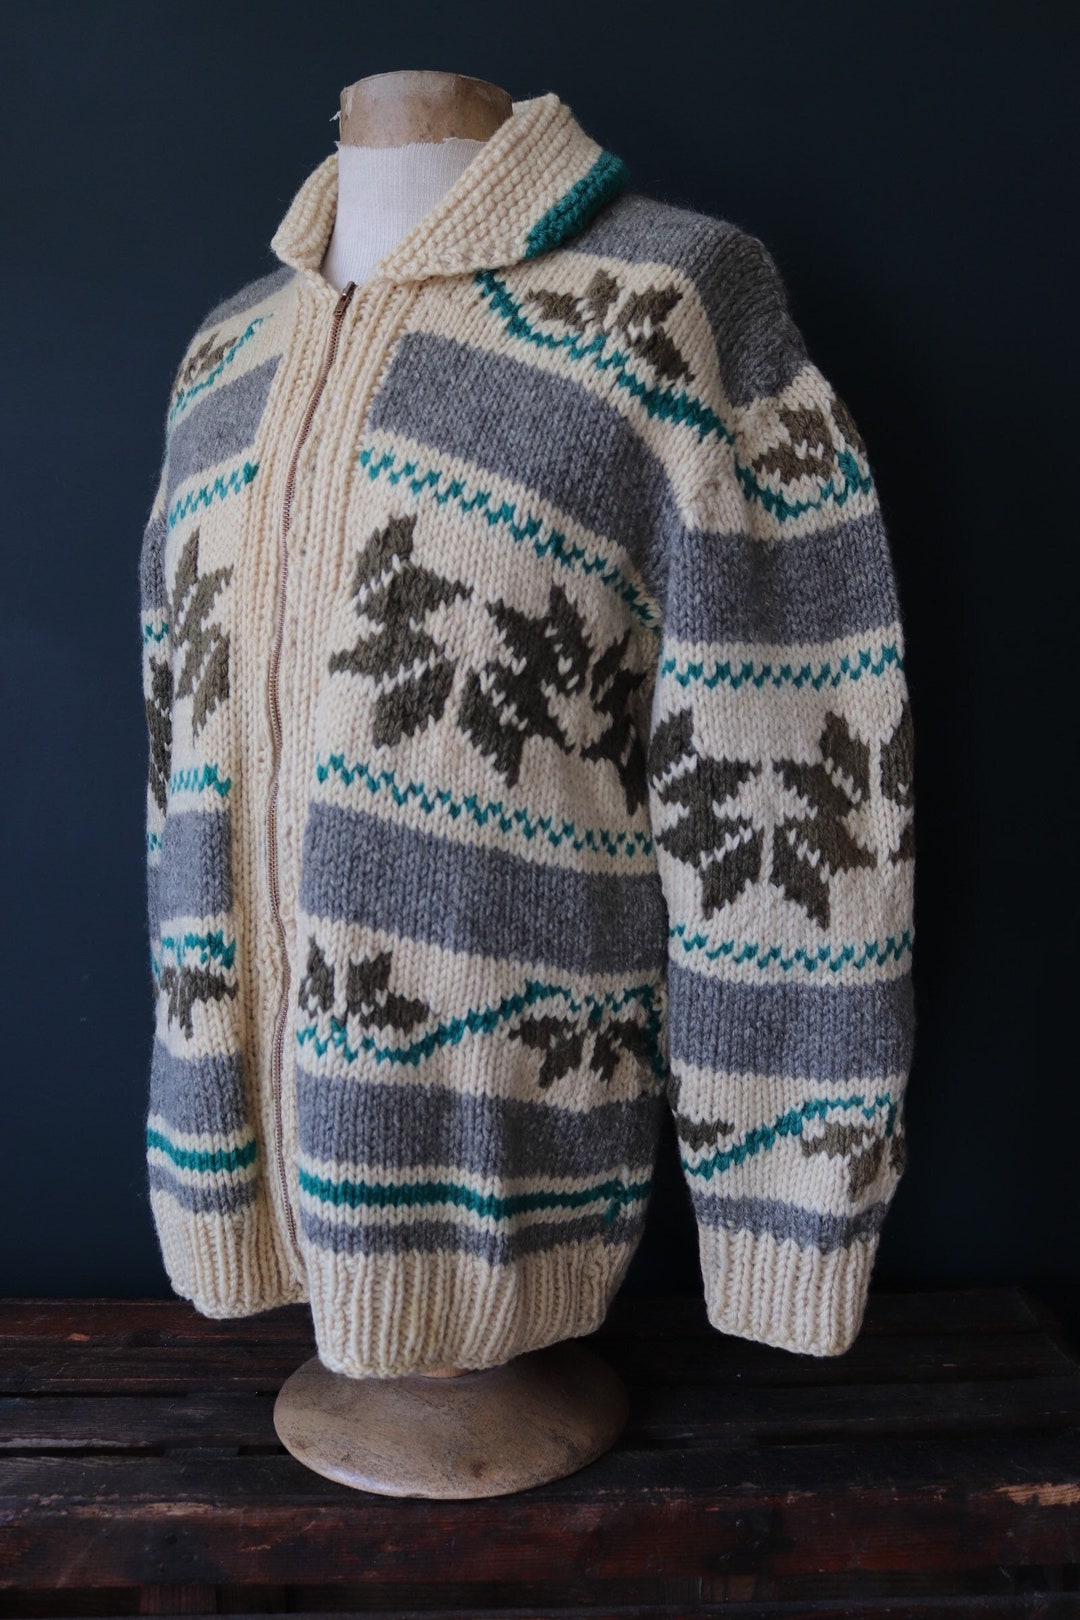 Vintage 1960s Hand Knitted Wool Cowichan Sweater Cardigan Jumper Knit ...